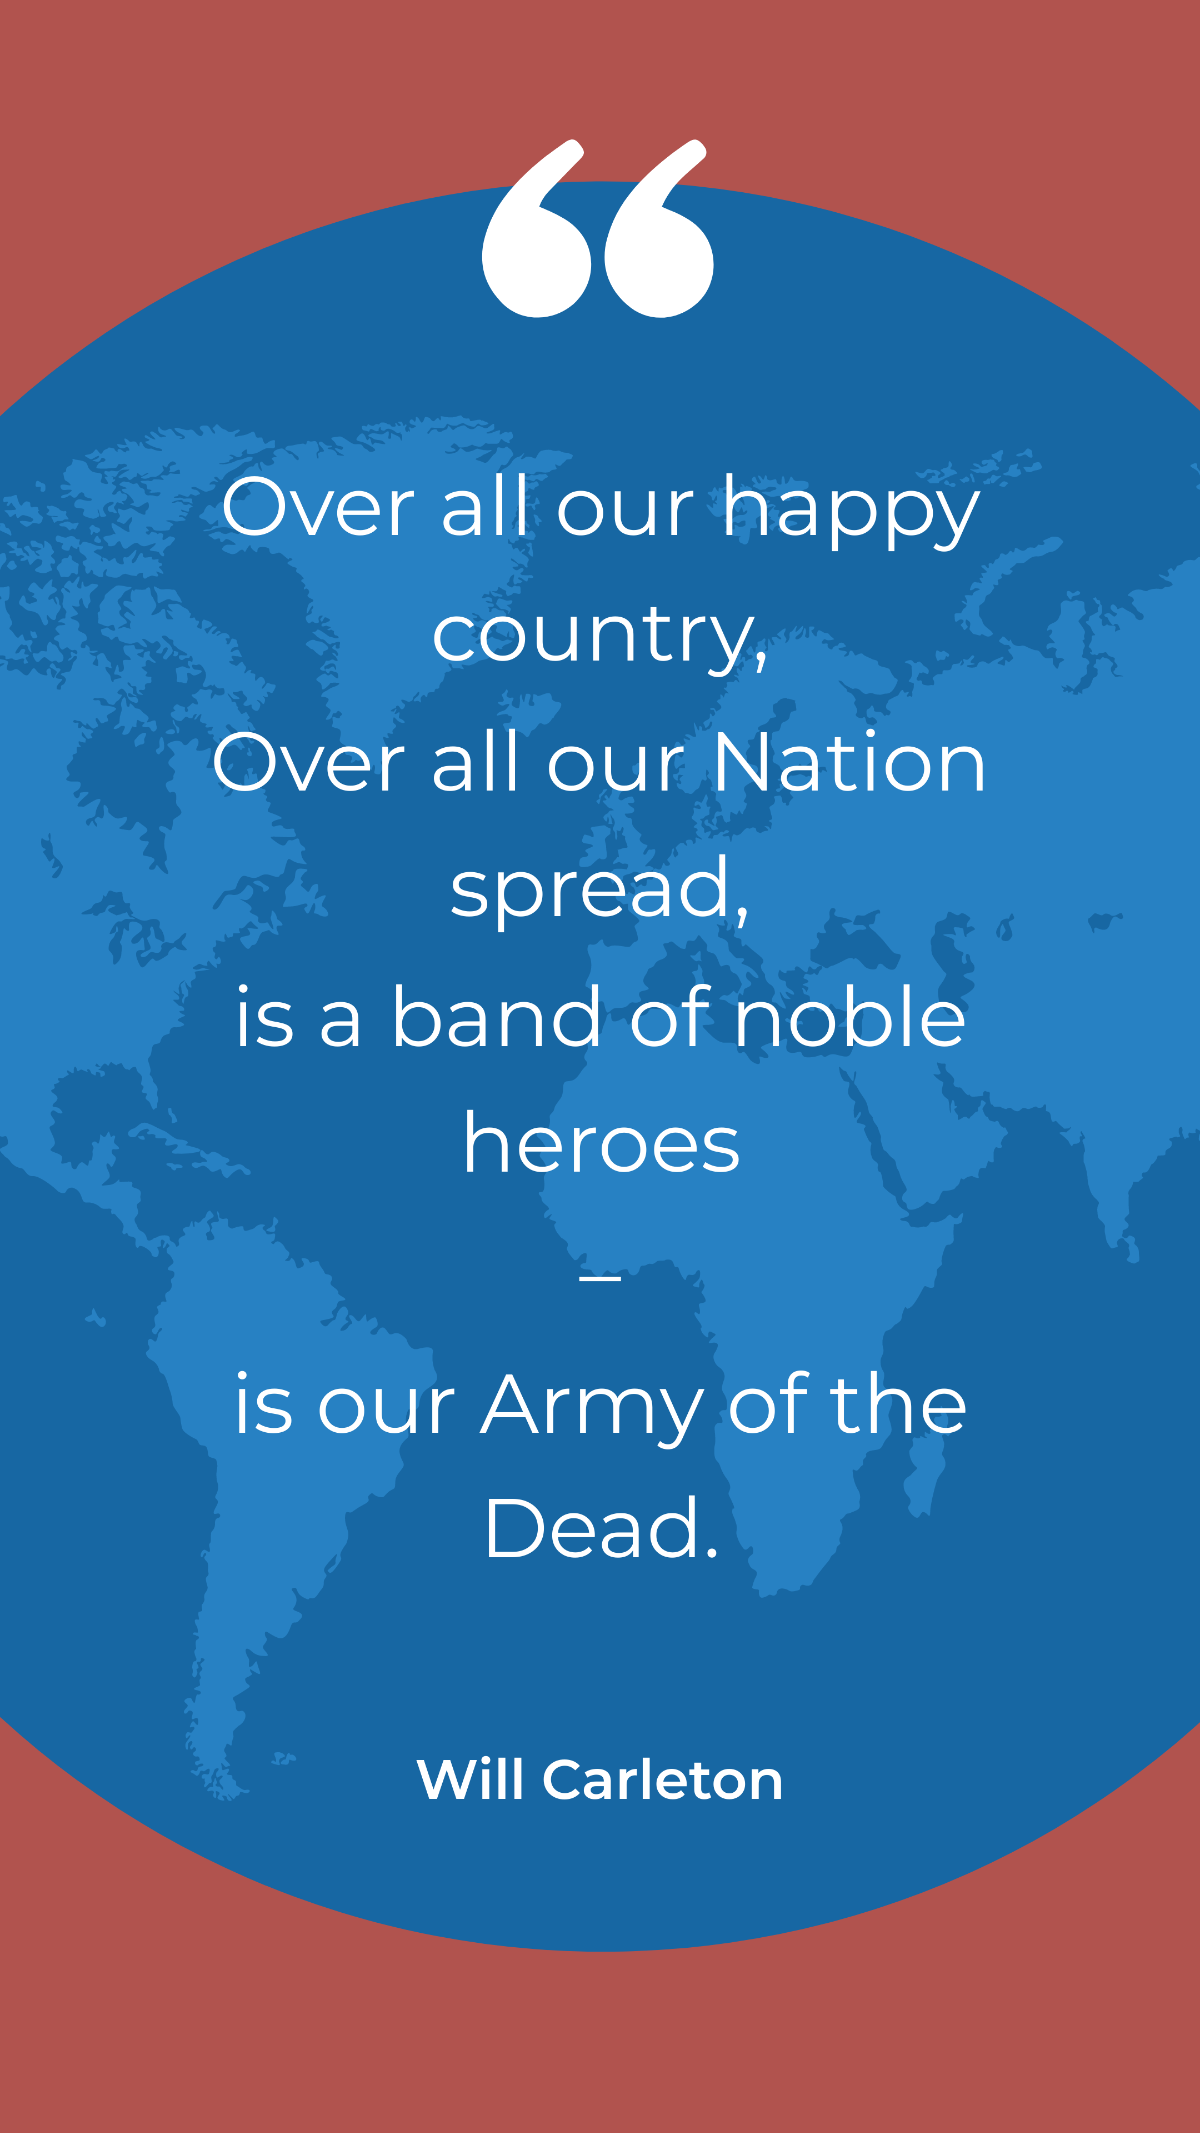 Free Will Carleton - Over all our happy country over all our Nation spread, is a band of noble heroes–is our Army of the Dead. Template